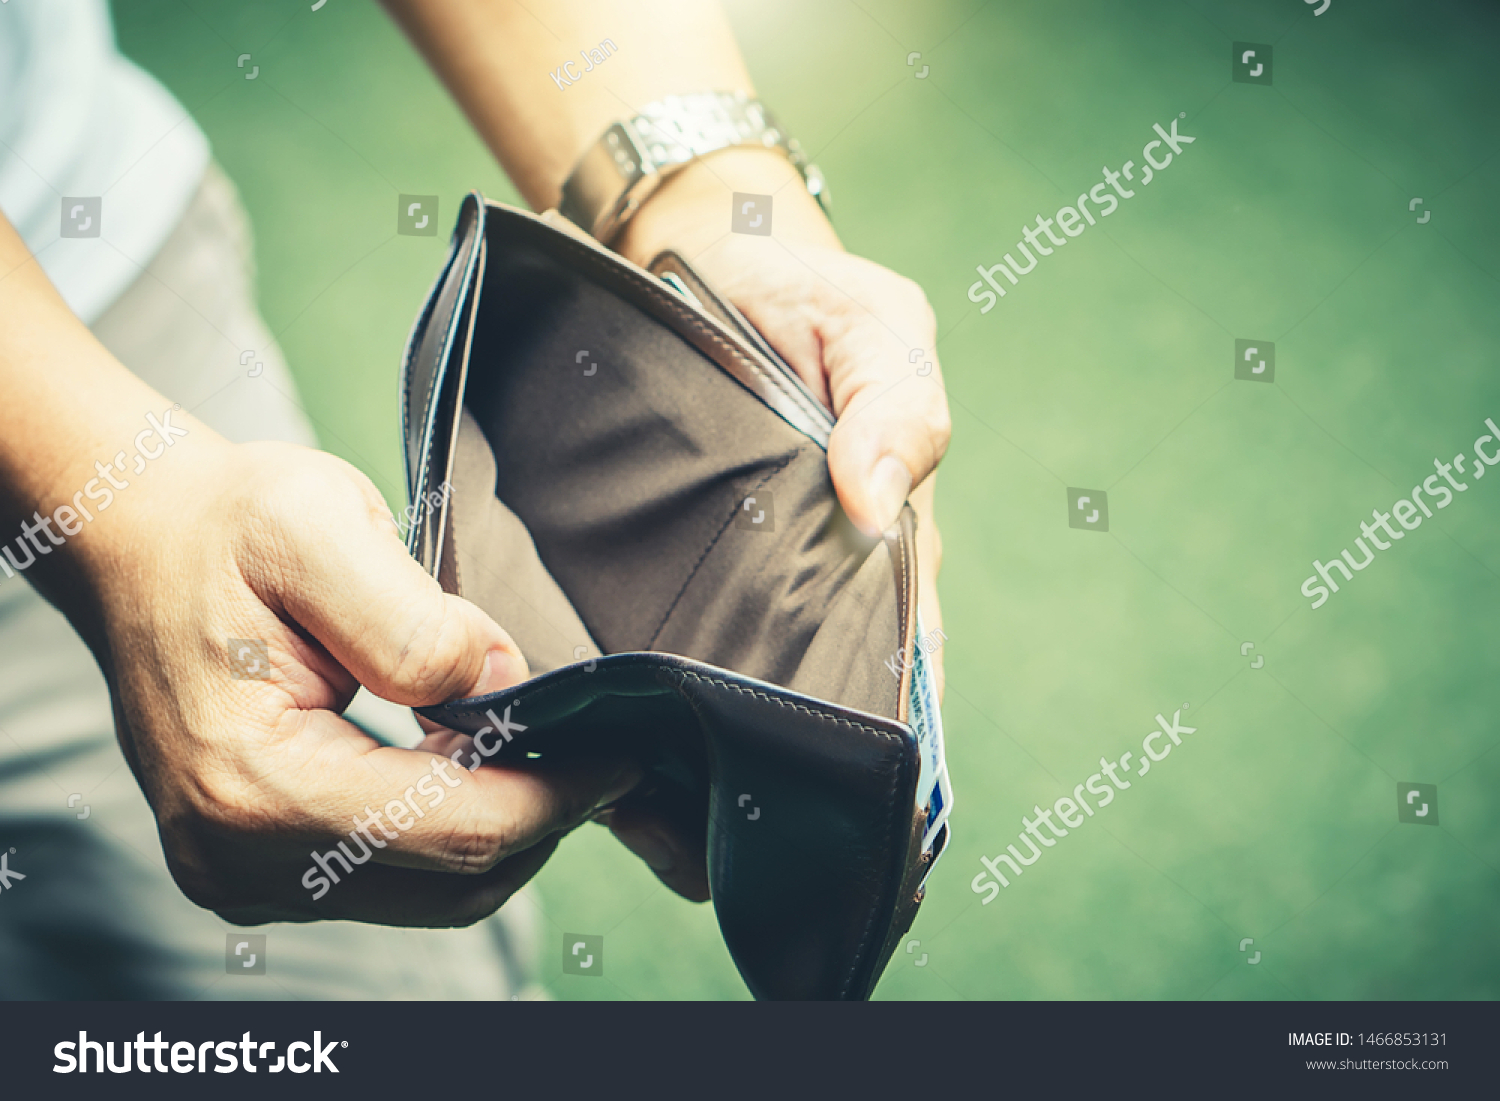 Poor man bankrupt with no credit in debt hand hold empty black leather wallet because economy down turn depression crisis fail working saving finance money plan loss job unemploy. No money to pay #1466853131